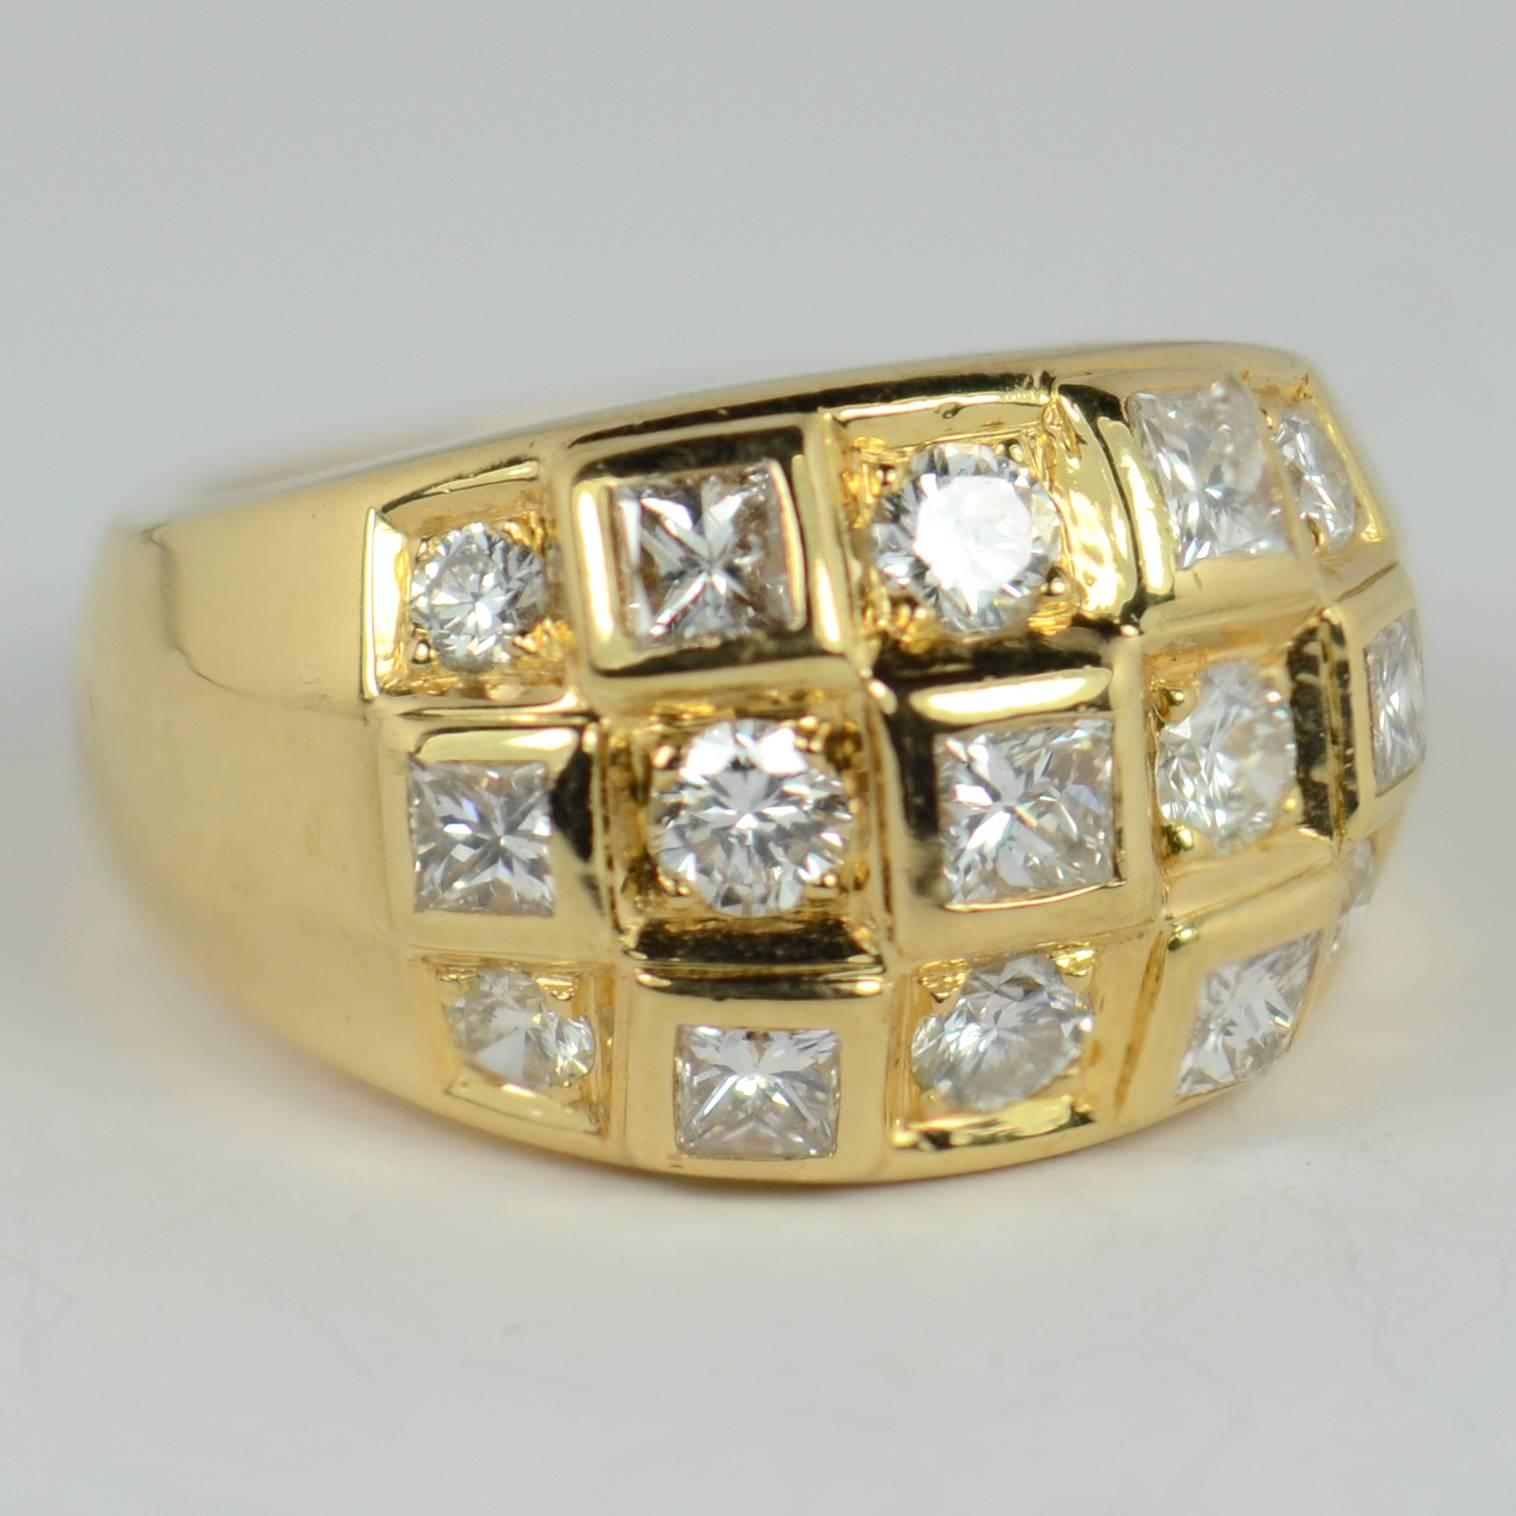 An 18 carat gold dome ring set in checkerboard fashion with 7 collet-set princess-cut diamonds and 8 round brilliant cut diamonds weighing an estimated total of 2 carats.  

The head of the ring meets the shoulders in a gently geometric form